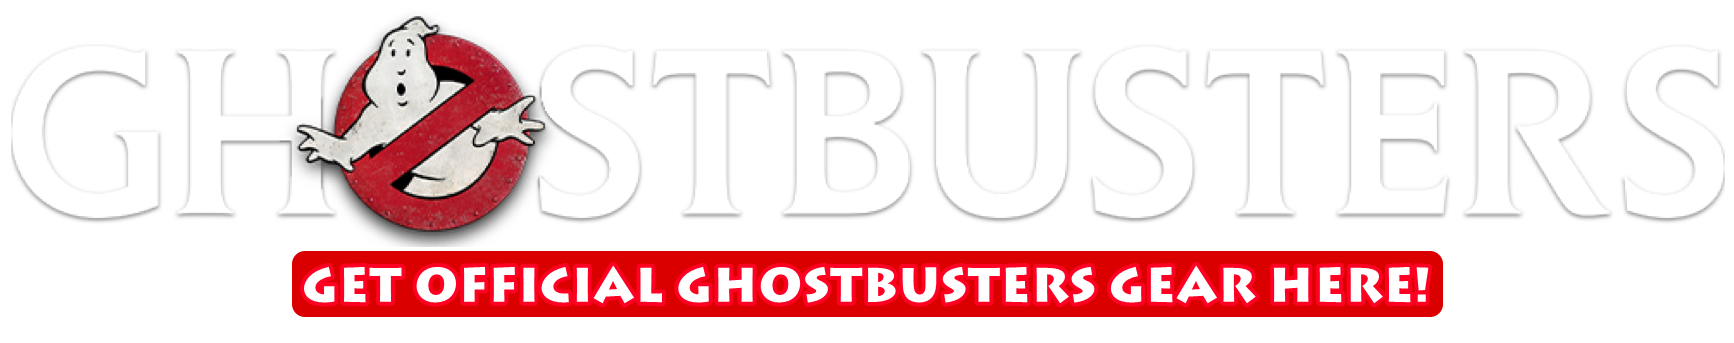 Get official Ghostbusters gear here!